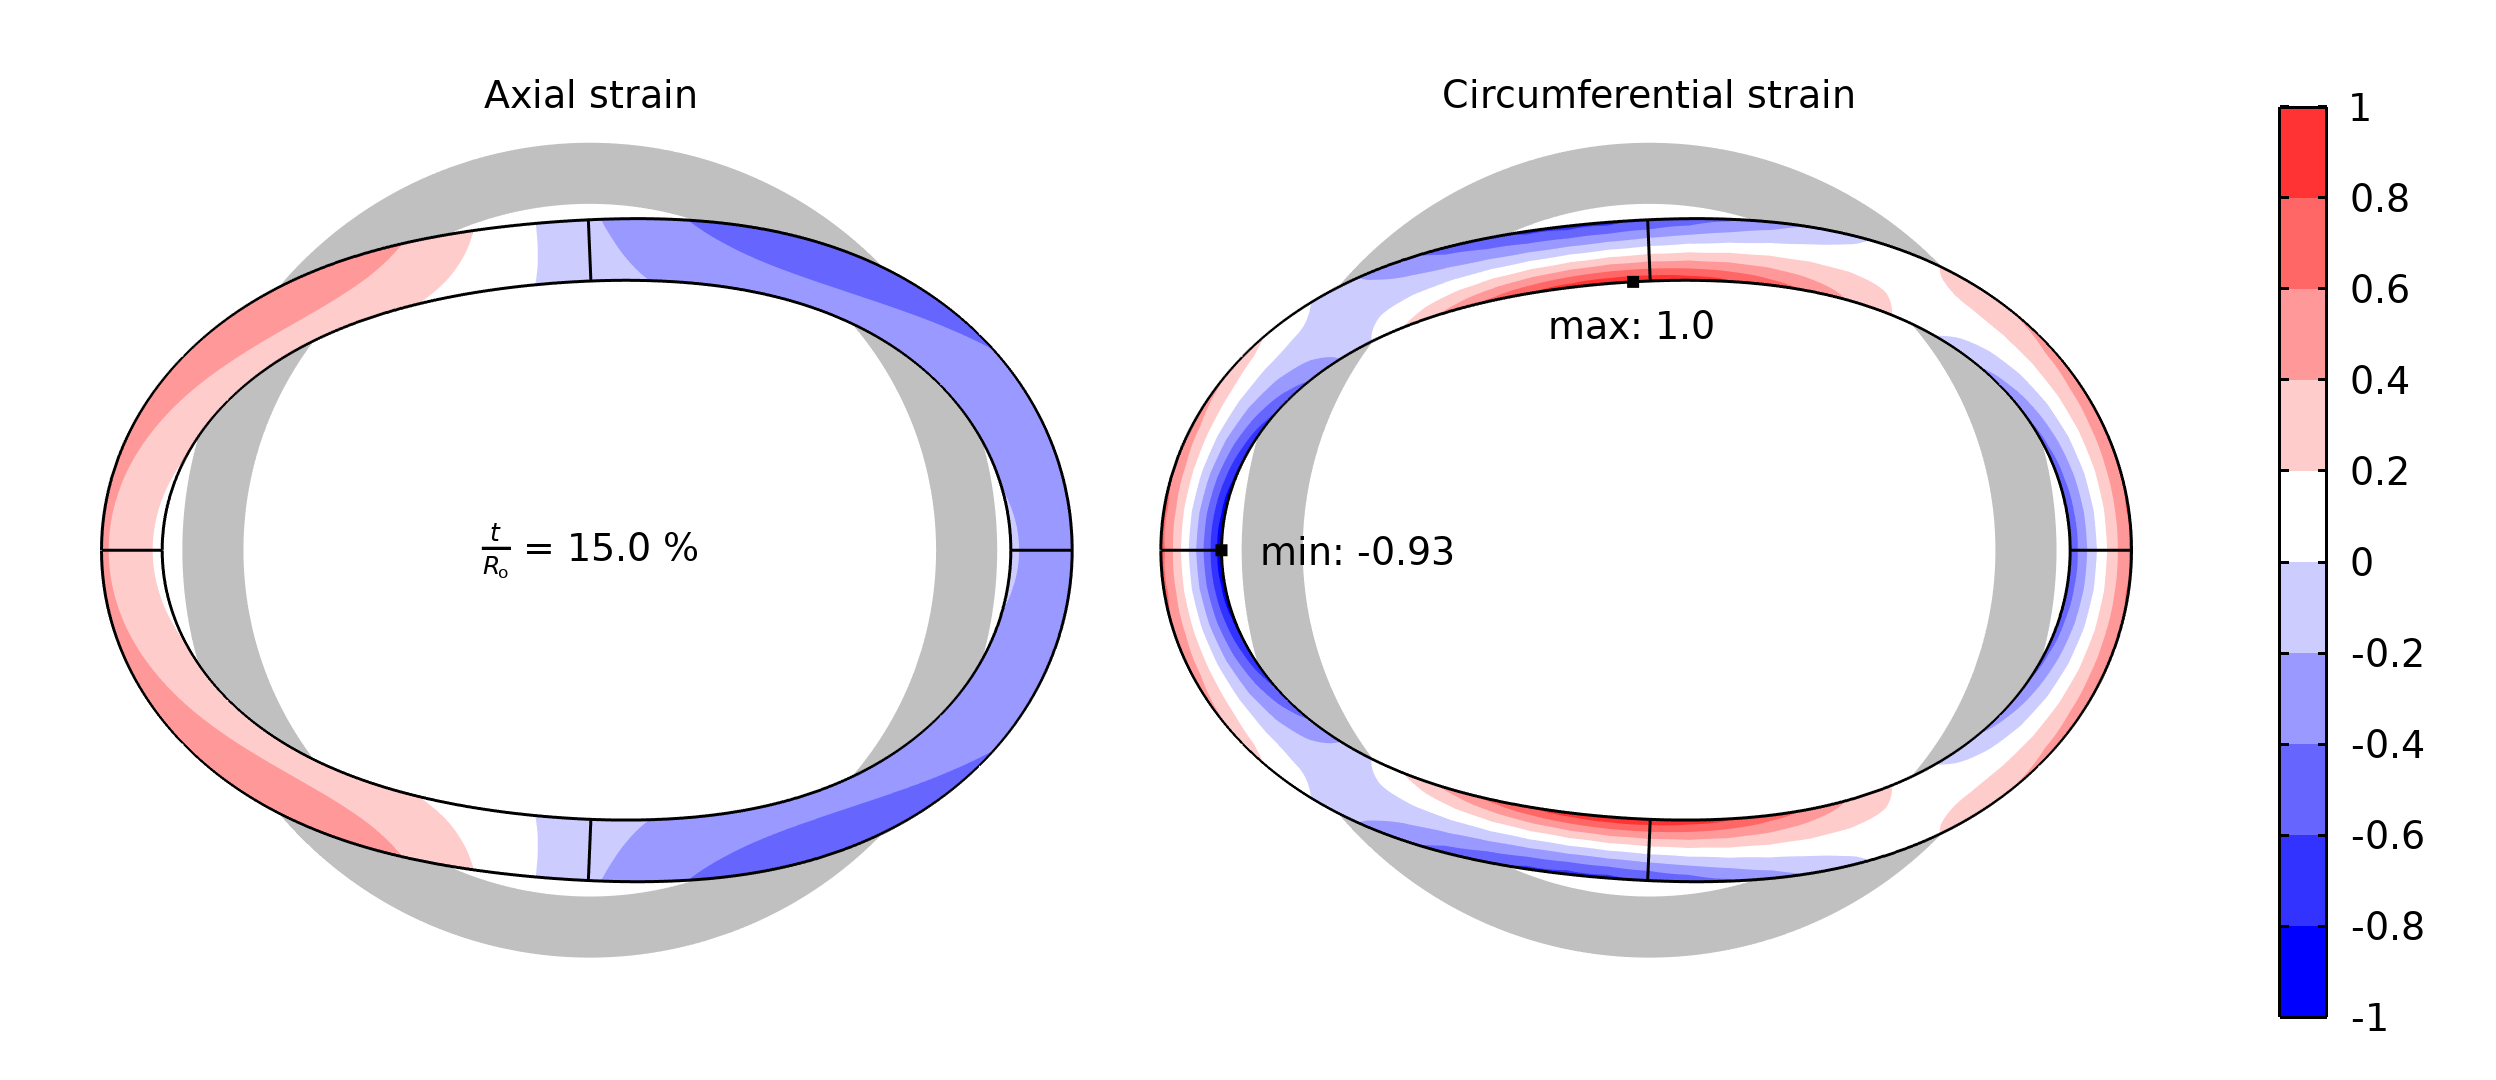 Two side-by-side plots of the normalized strains in axial (left) and circumferential (right) directions at the center of a thick-wall bend.